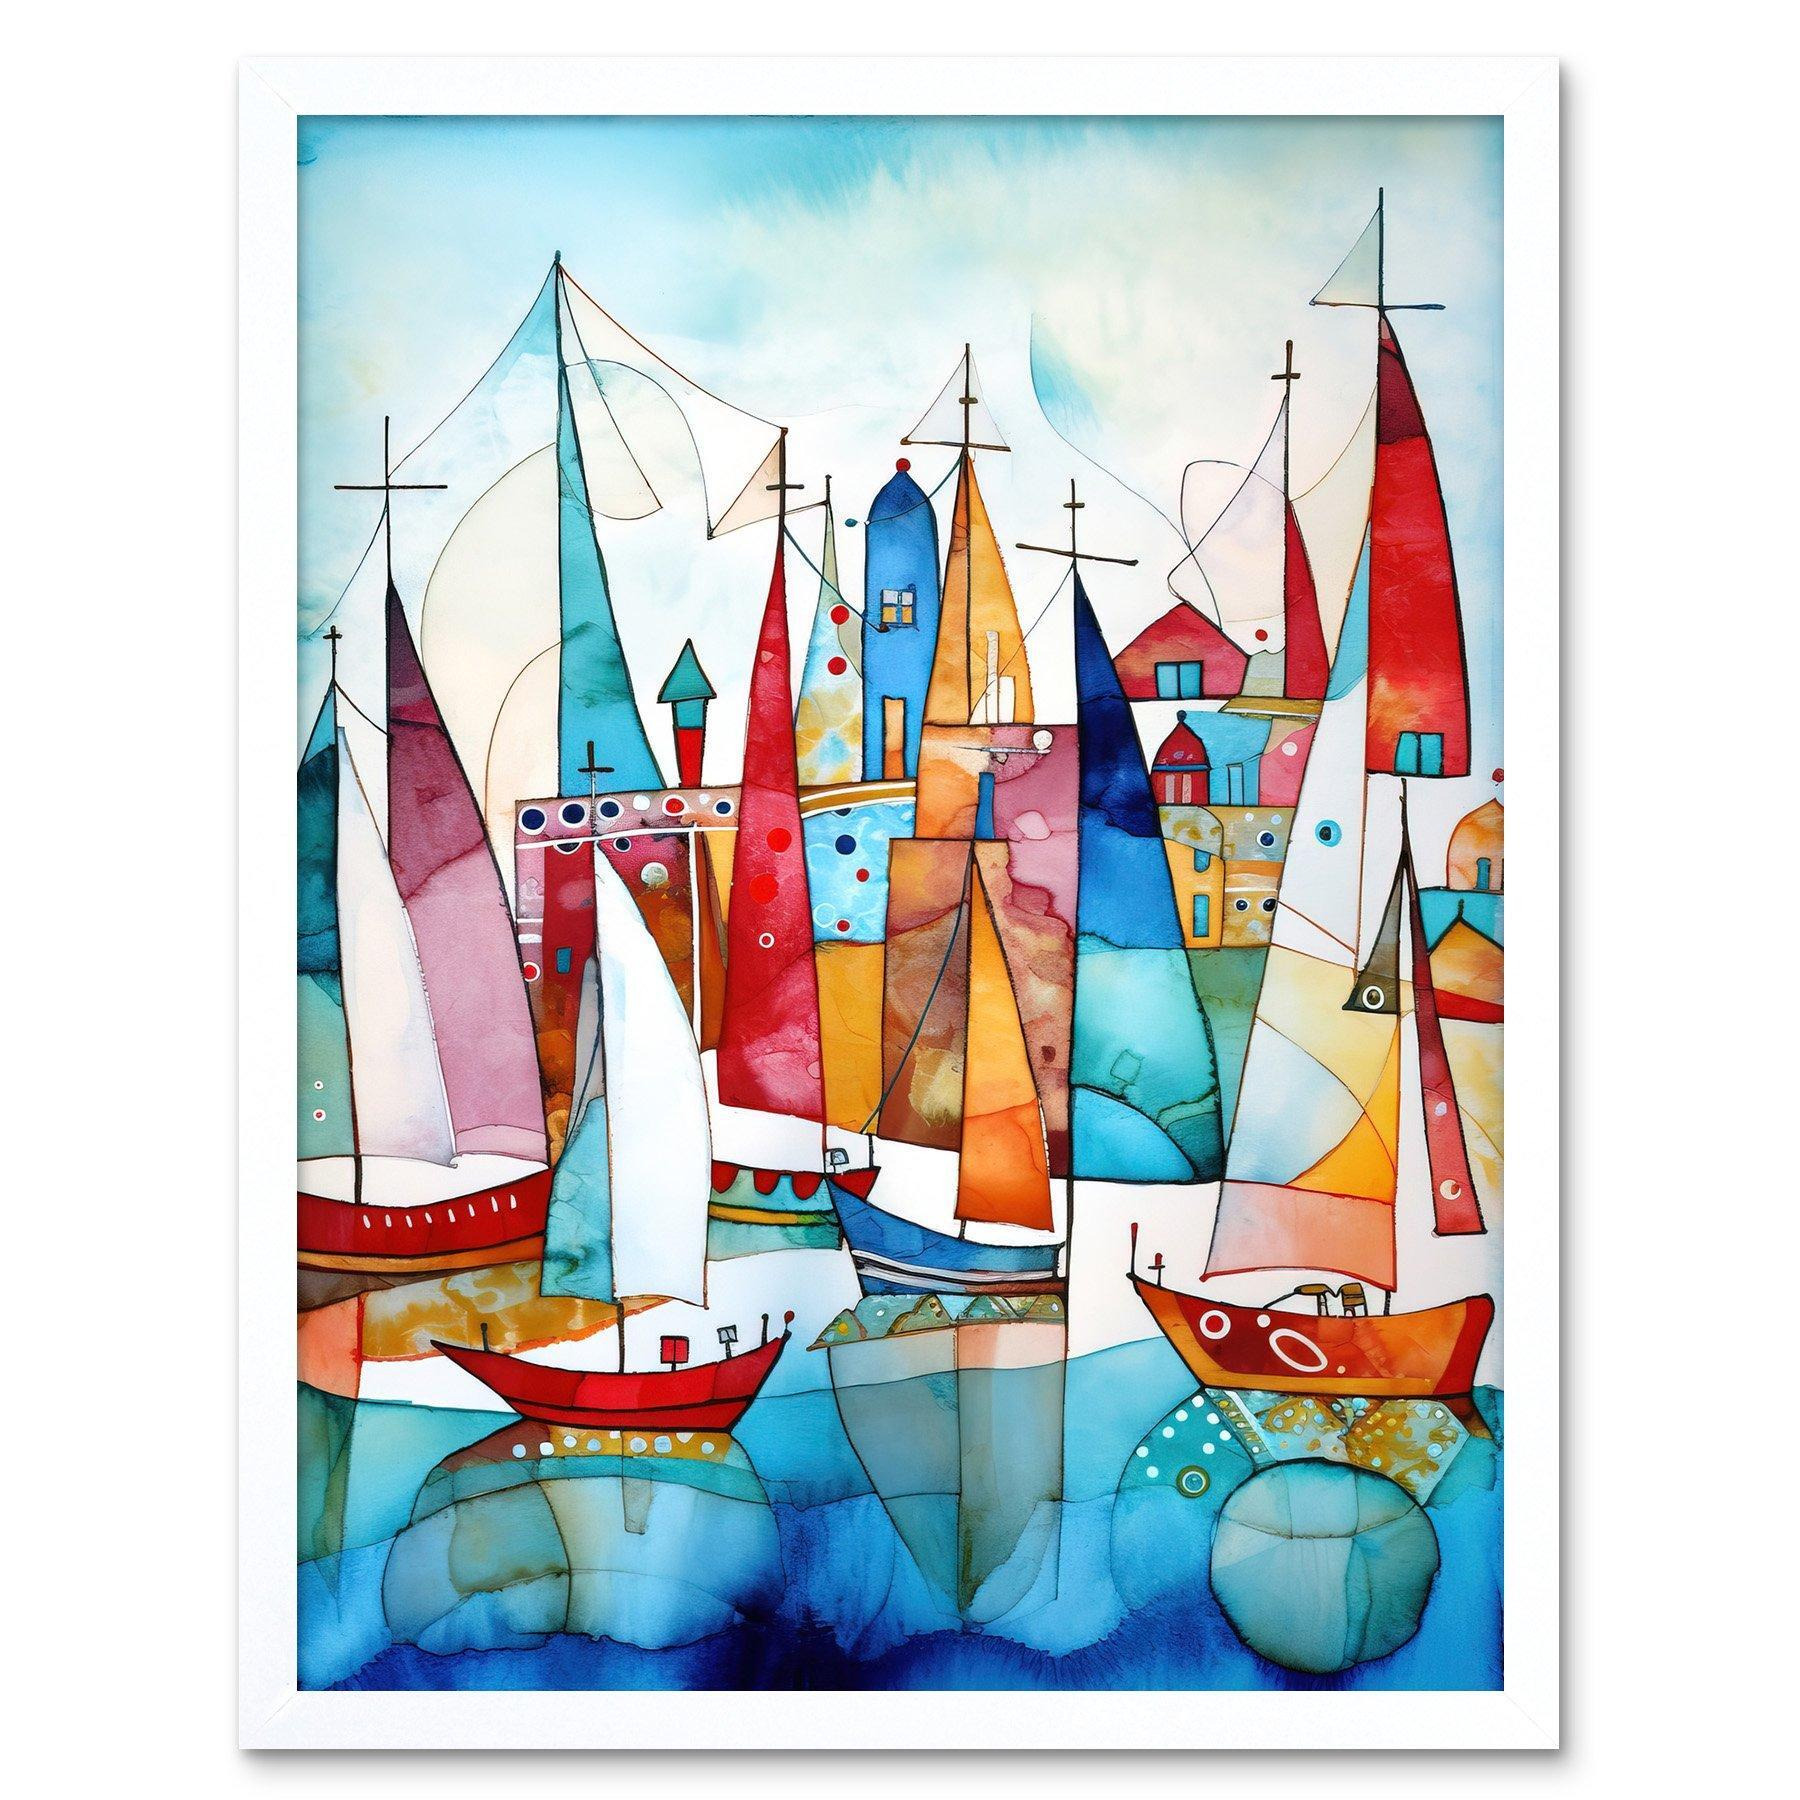 Harbour Boats Abstract Folk Art Watercolour Painting Art Print Framed Poster Wall Decor 12x16 inch - image 1